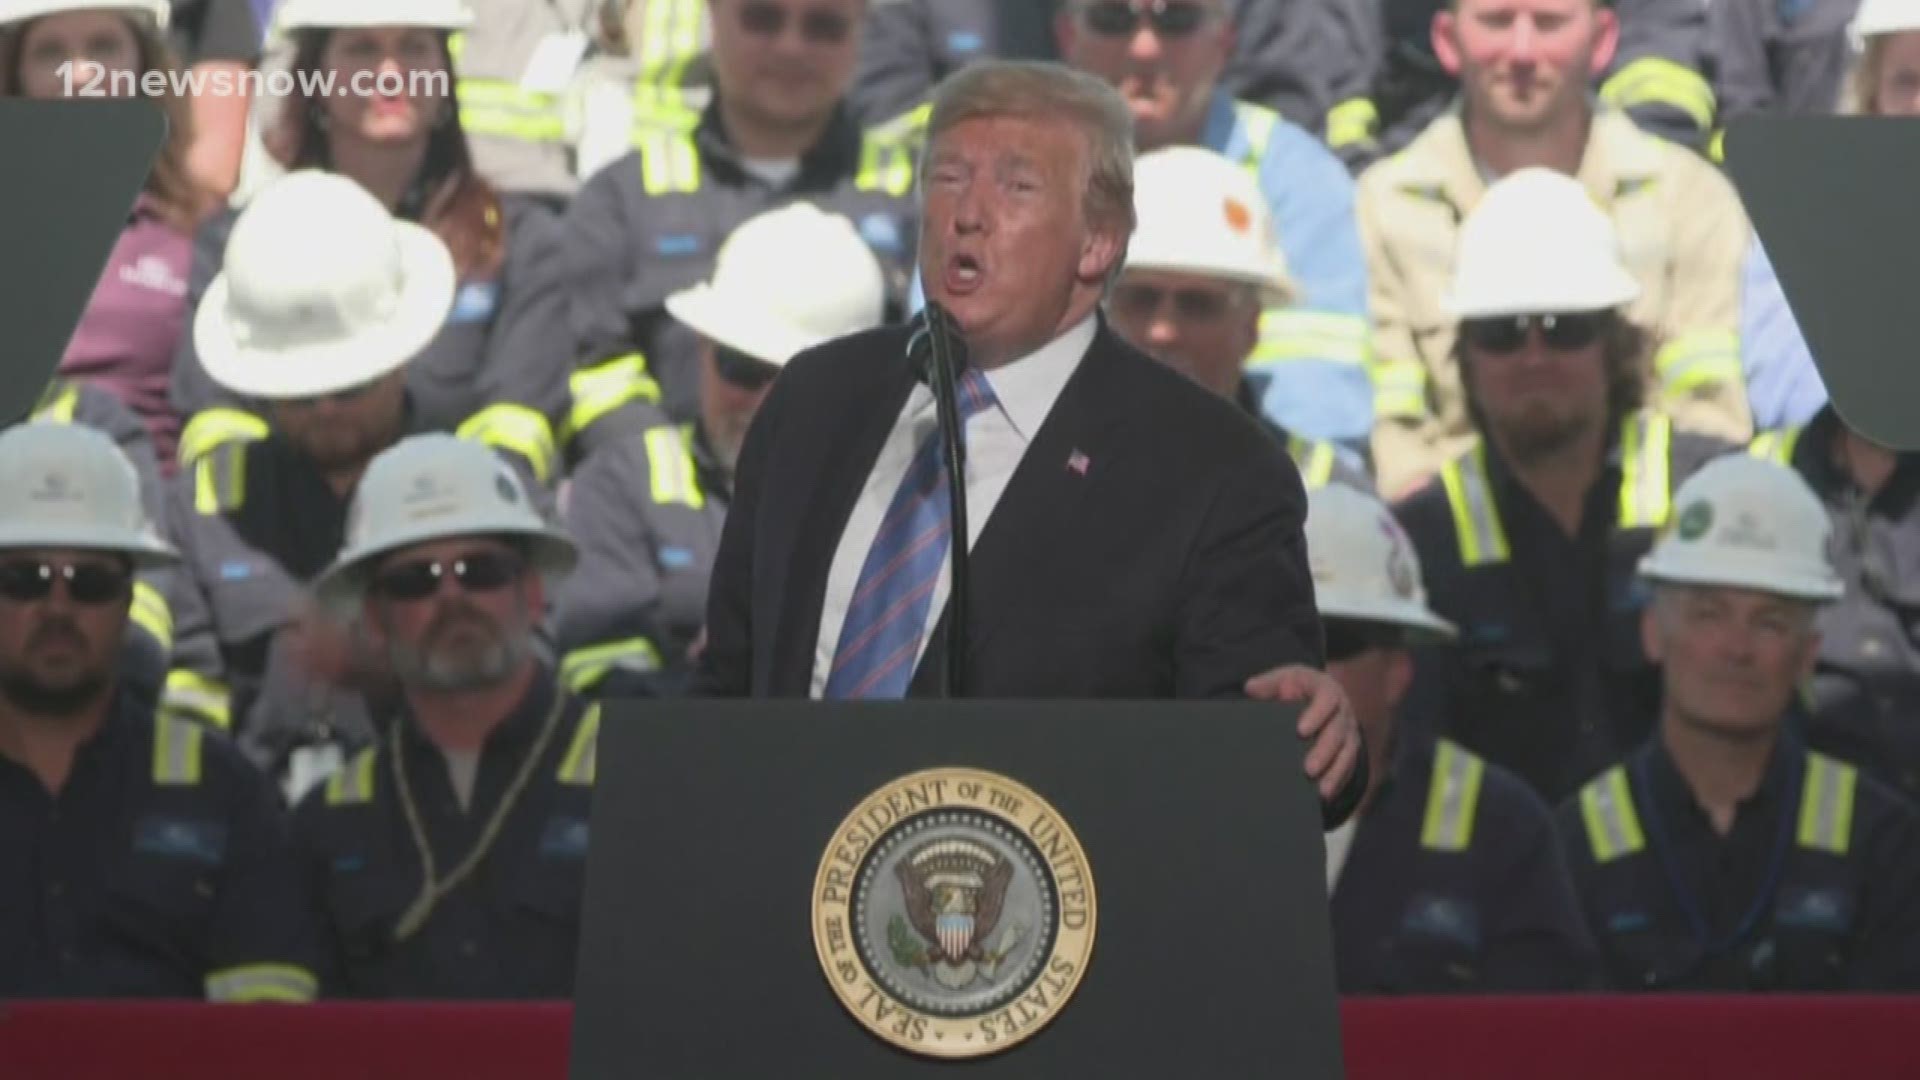 During his speech, President Trump notes 150,000 energy jobs created last year, which makes for the lowest unemployment overall in 51 years.